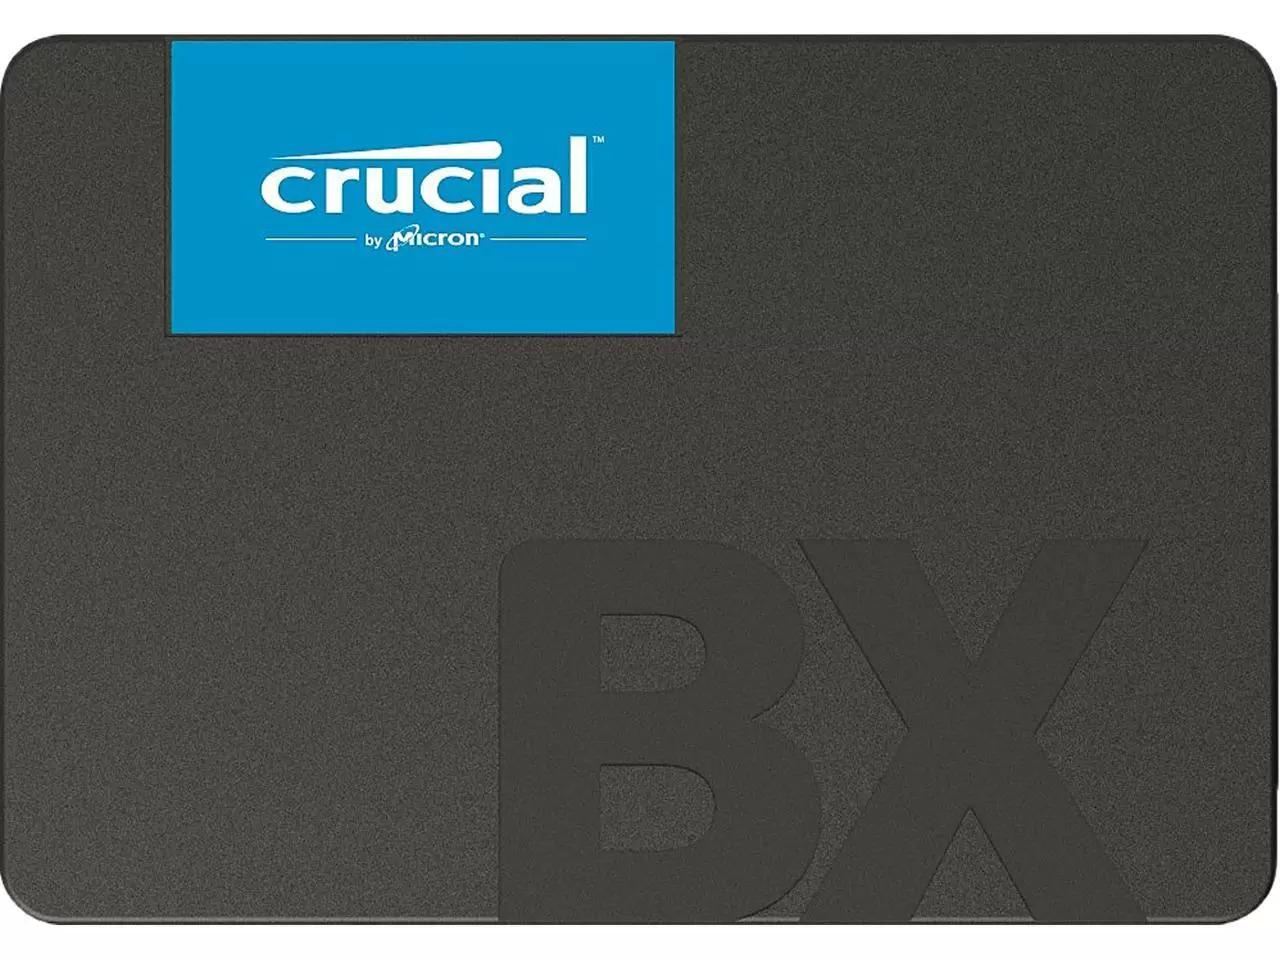 1TB Crucial BX500 3D NAND SATA SSD Solid State Drive for $57.99 Shipped